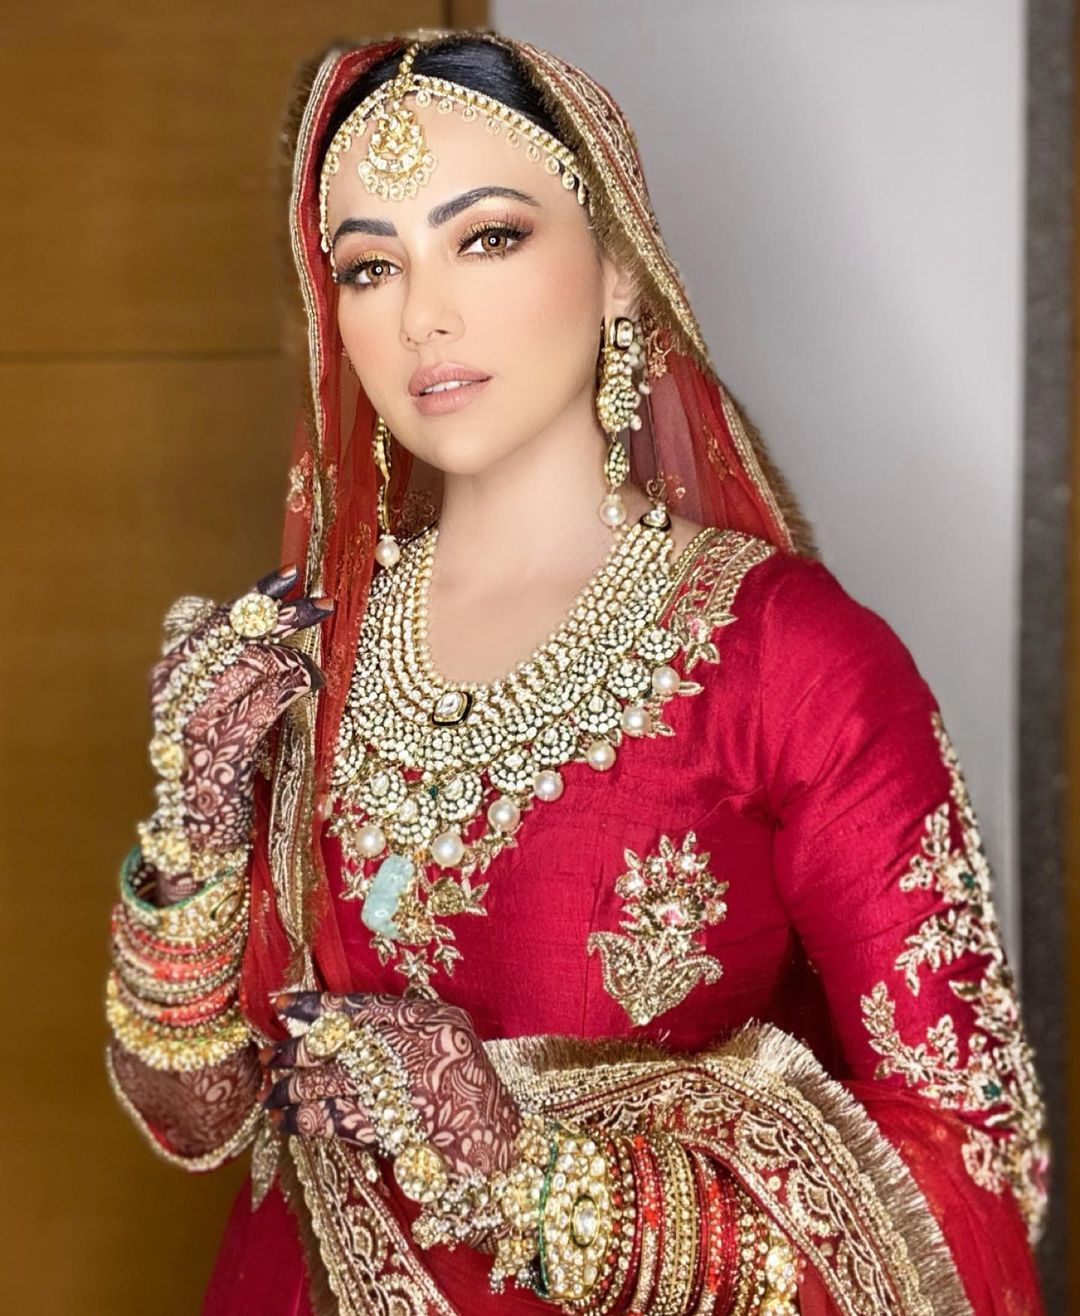 More pictures from Sana Khan Anas Sayed wedding